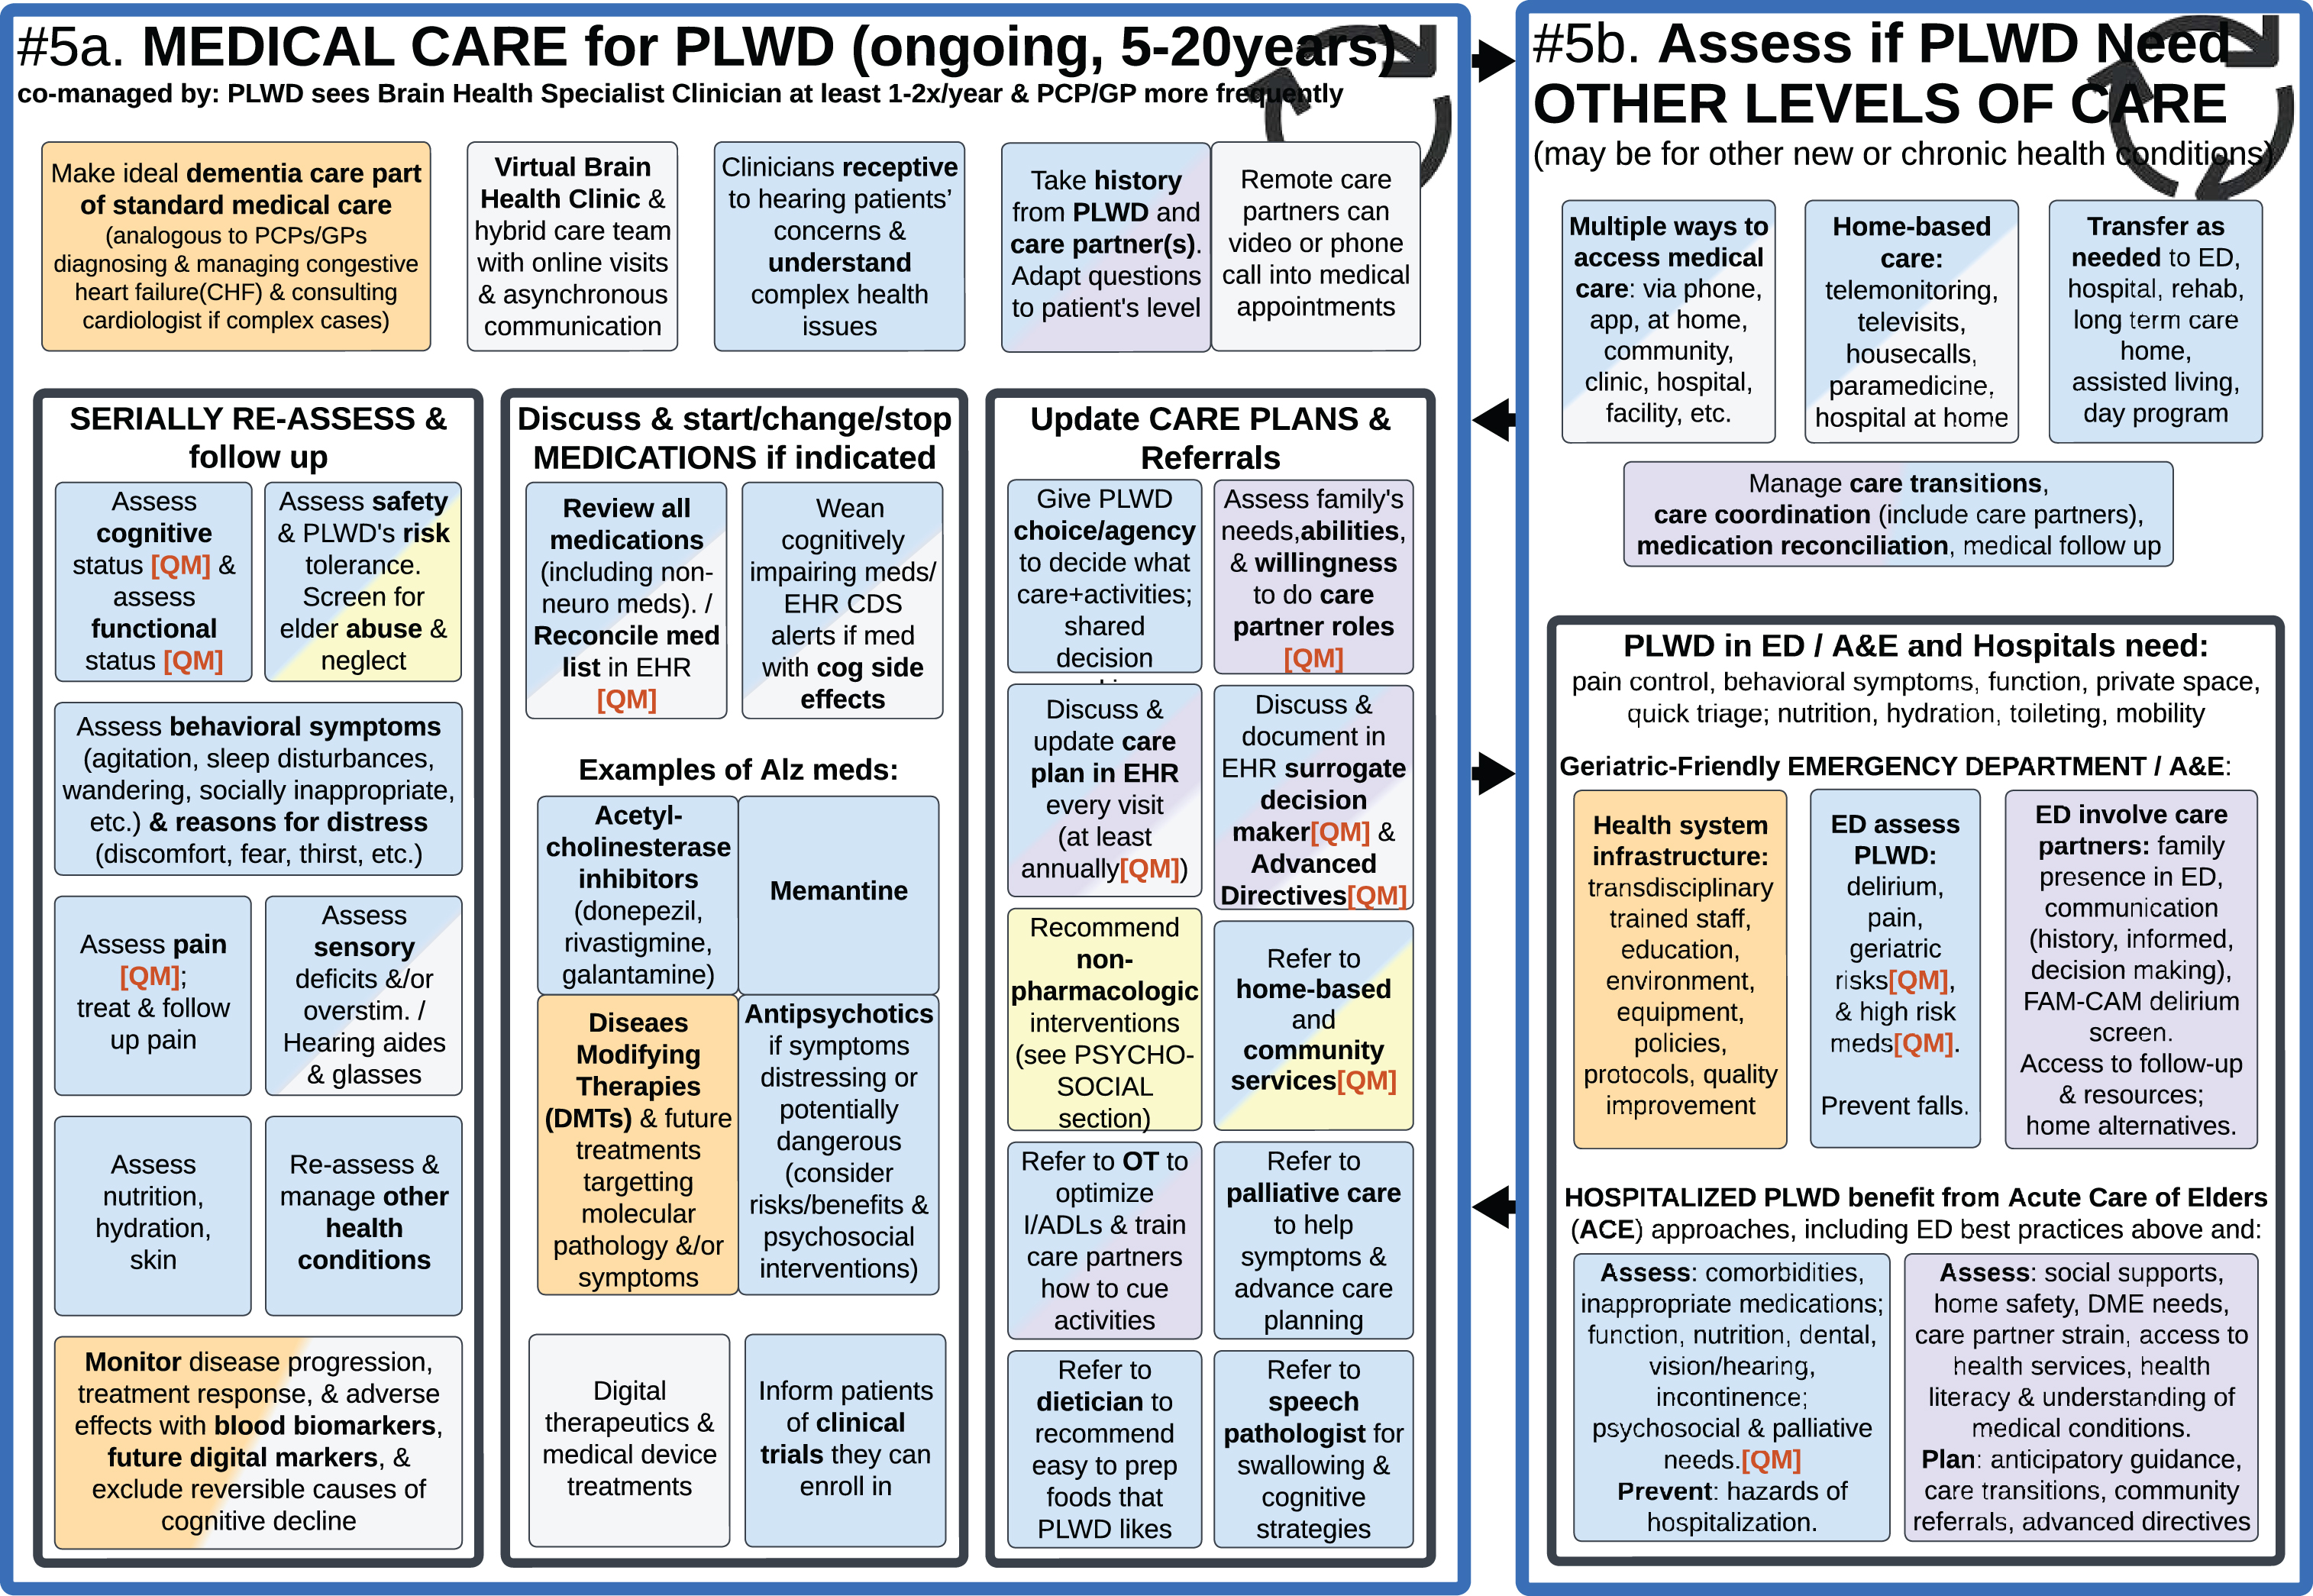 #5a. Medical Care for PLWD (ongoing, 5–20 years) (left); #5b. Assess if PLWD Need Other Levels of Care (right).